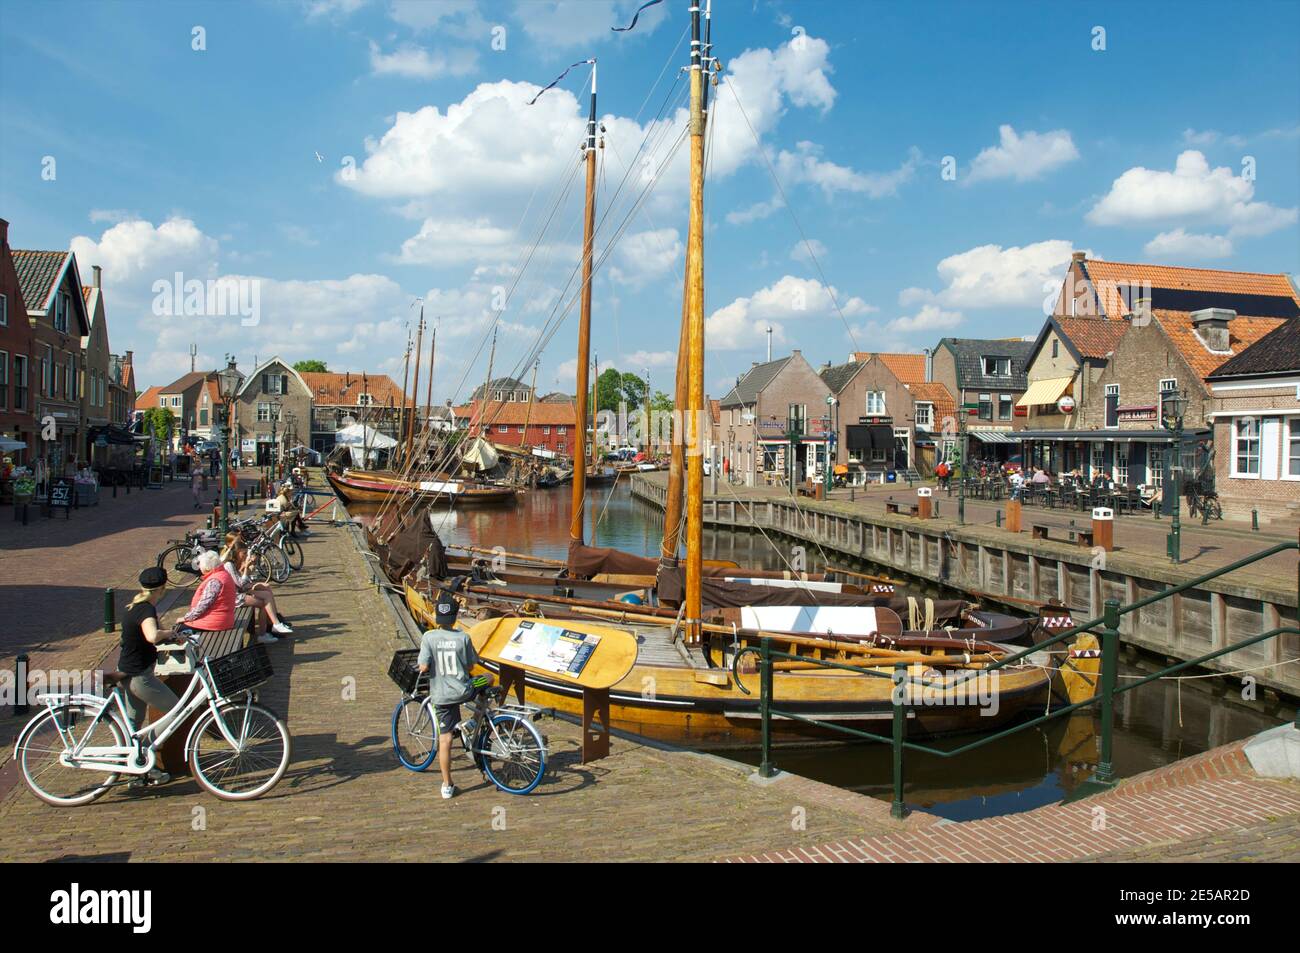 The open air museum with the harbor of the village of Spakenburg with wooden ships and the shipyard, the Netherlands Stock Photo